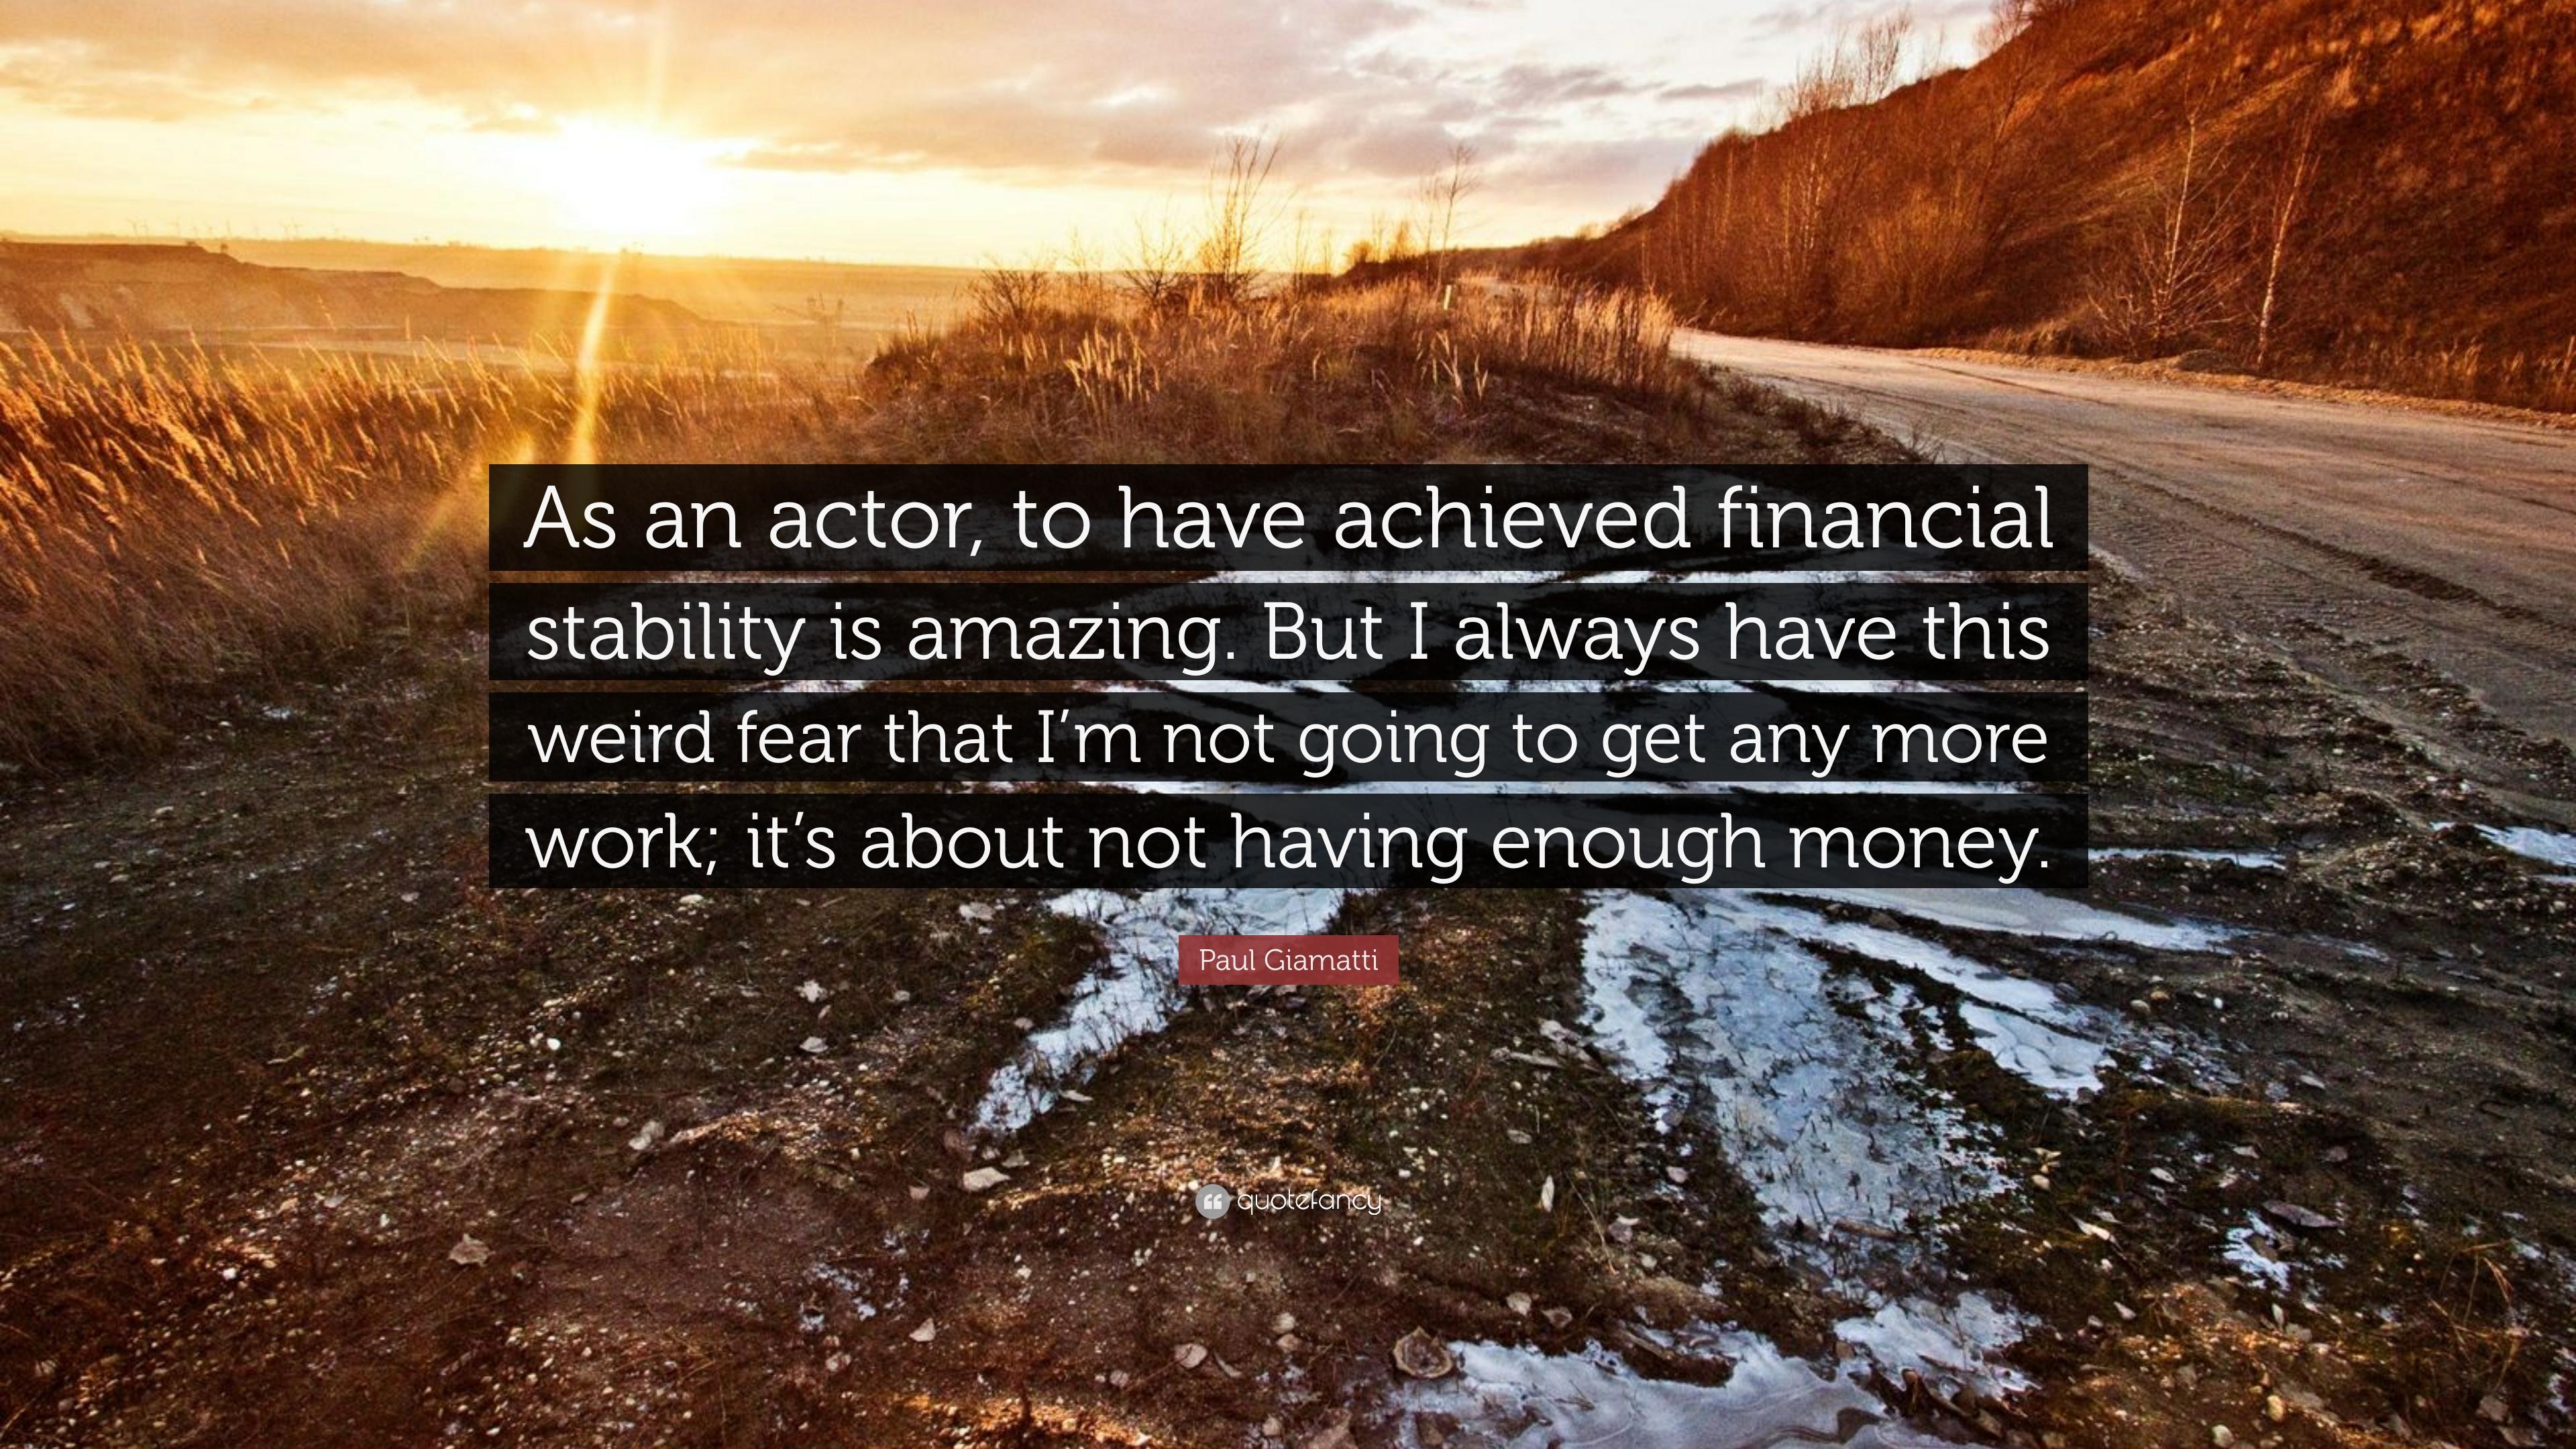 Paul Giamatti Quote: “As an actor, to have achieved financial